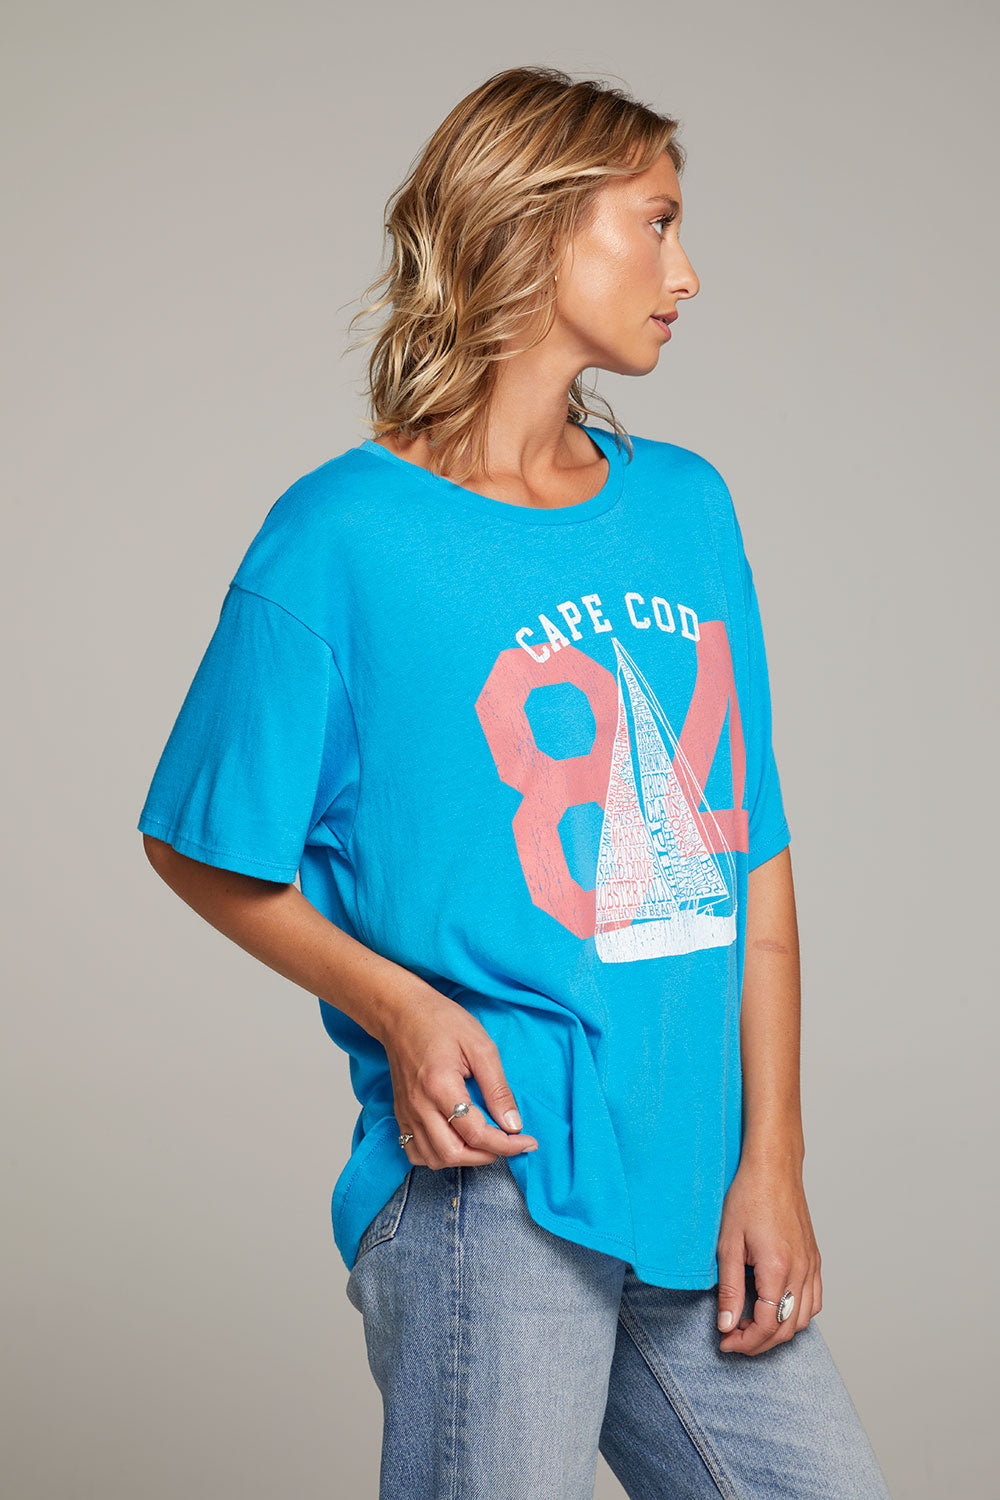 Cape Cod Tee WOMENS chaserbrand